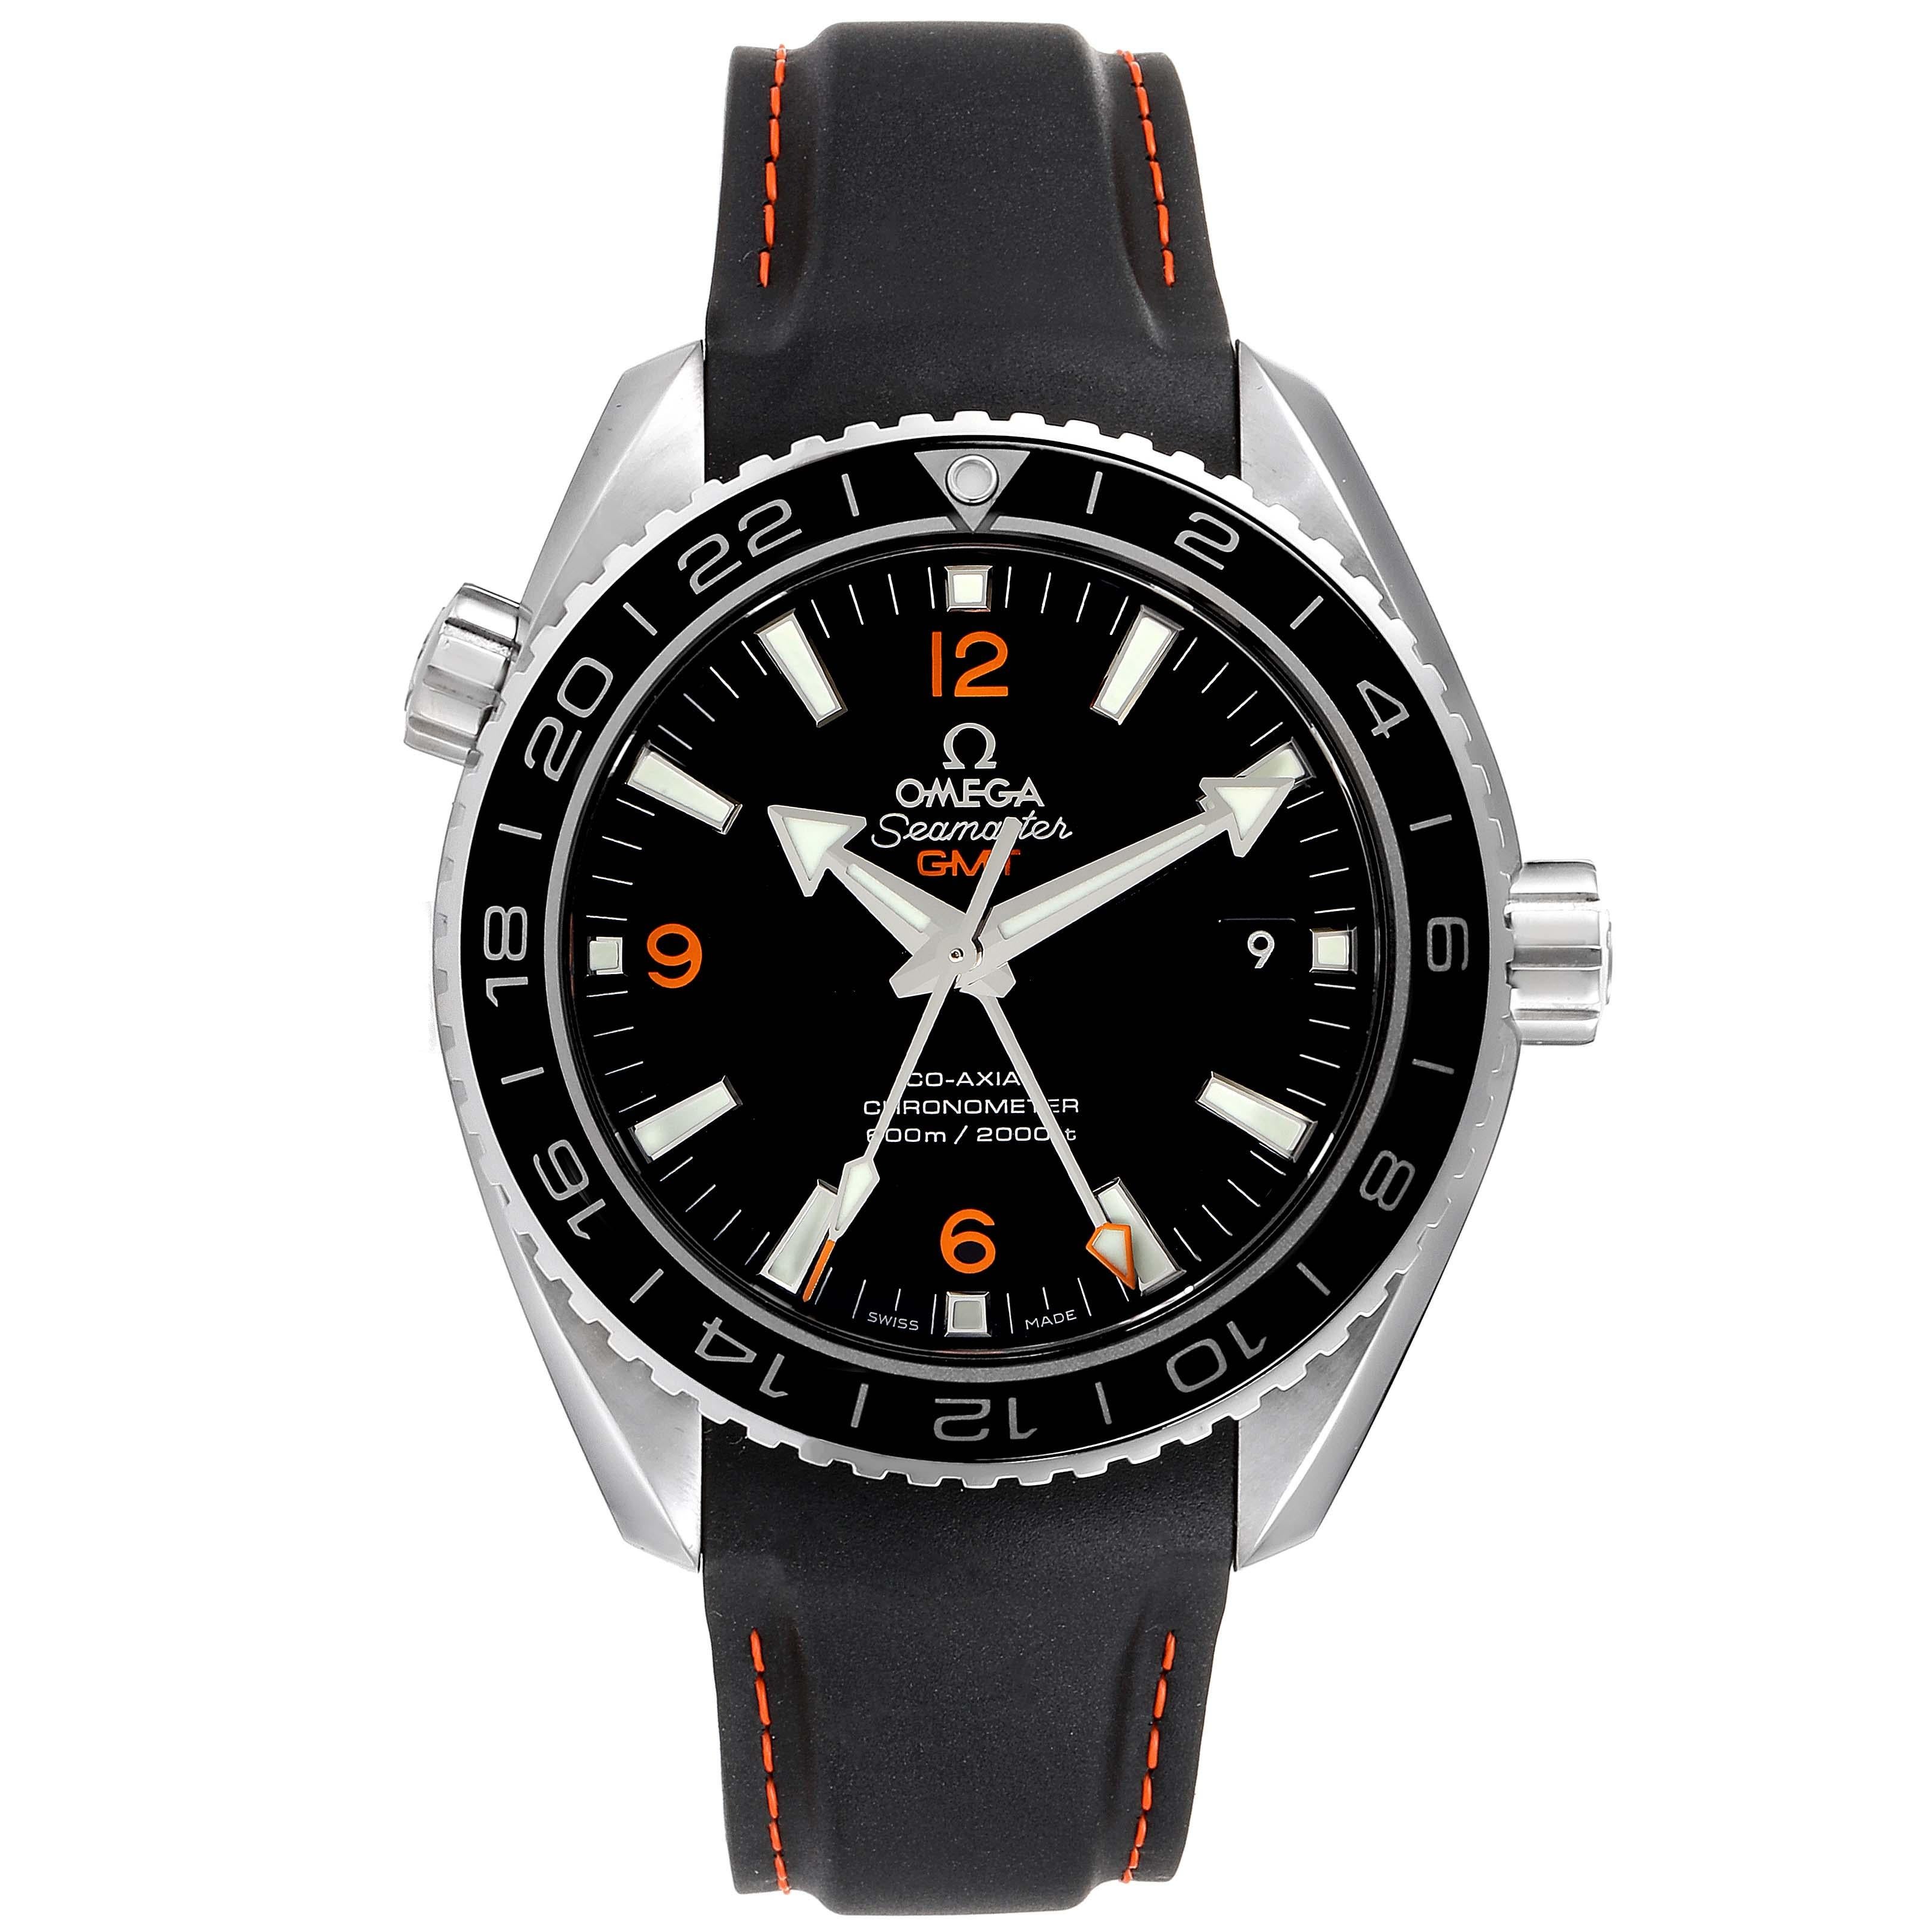 Omega Seamaster Planet Ocean GMT 600m Steel Mens Watch 232.32.44.22.01.002 Box Card. Automatic self-winding chronometer movement with Co-Axial Escapement for greater precision, stability and durability. GMT with time zone function. Silicon